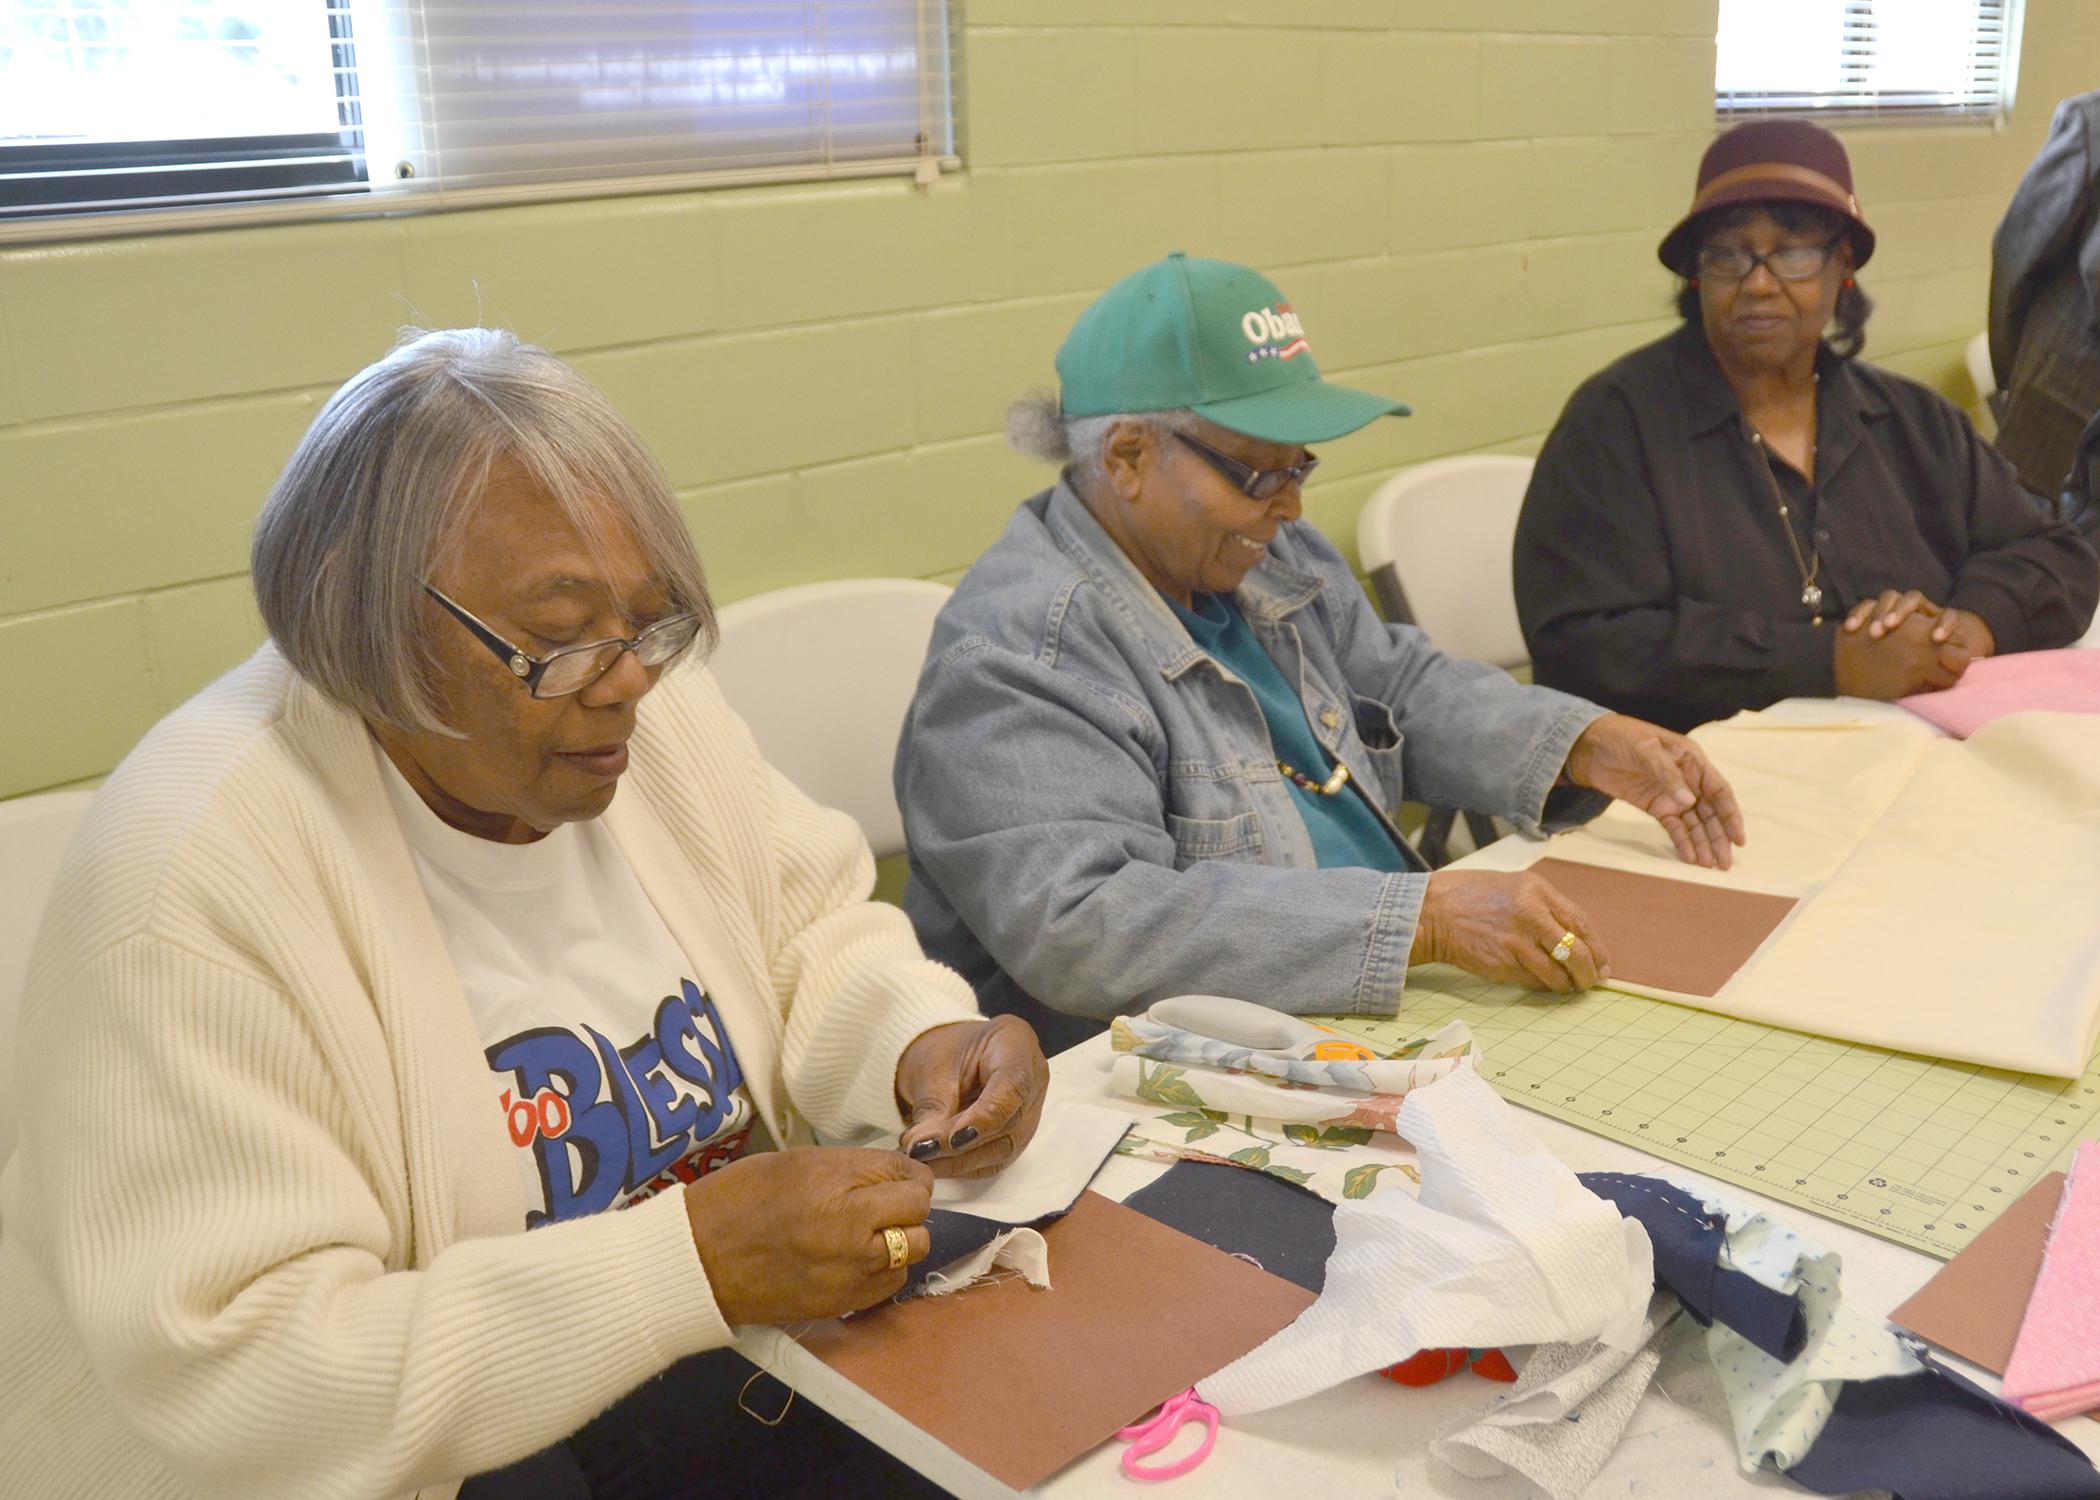 Annette Lockett, left, Thelma Washington and Mary Kohn, members of a newly formed Mississippi Homemaker Volunteers Club in Holmes County, cut out and sew quilt squares as part of a quilt-making project on Nov. 24, 2015. The group donated 67 lap quilts to residents at the Lexington Manor Senior Care facility. (Photo by MSU Ag Communications/Susan Collins-Smith)